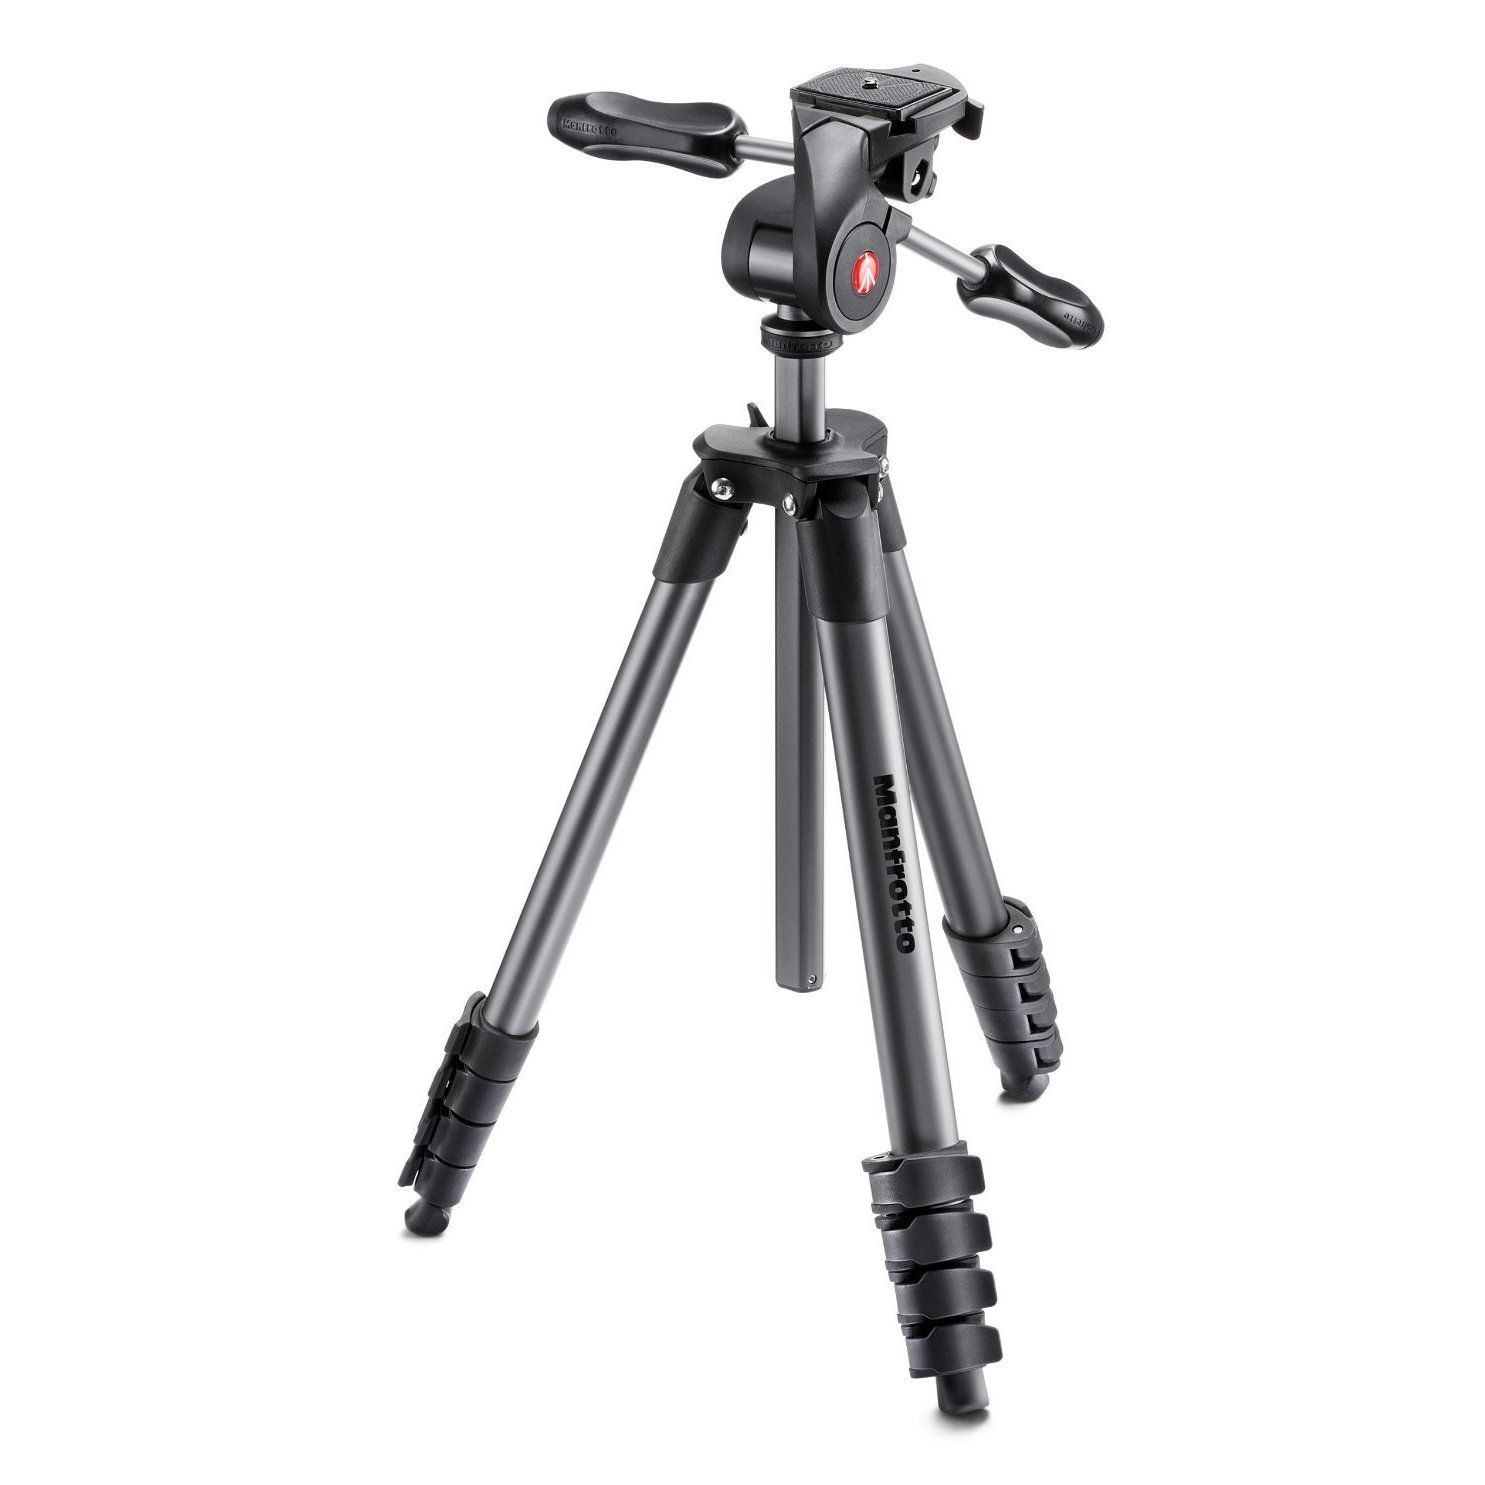 Sony HDR-TD10 Camcorder Tripod Folding Table-Top Tripod for Compact Digital Cameras and Camcorders Approx 5 H